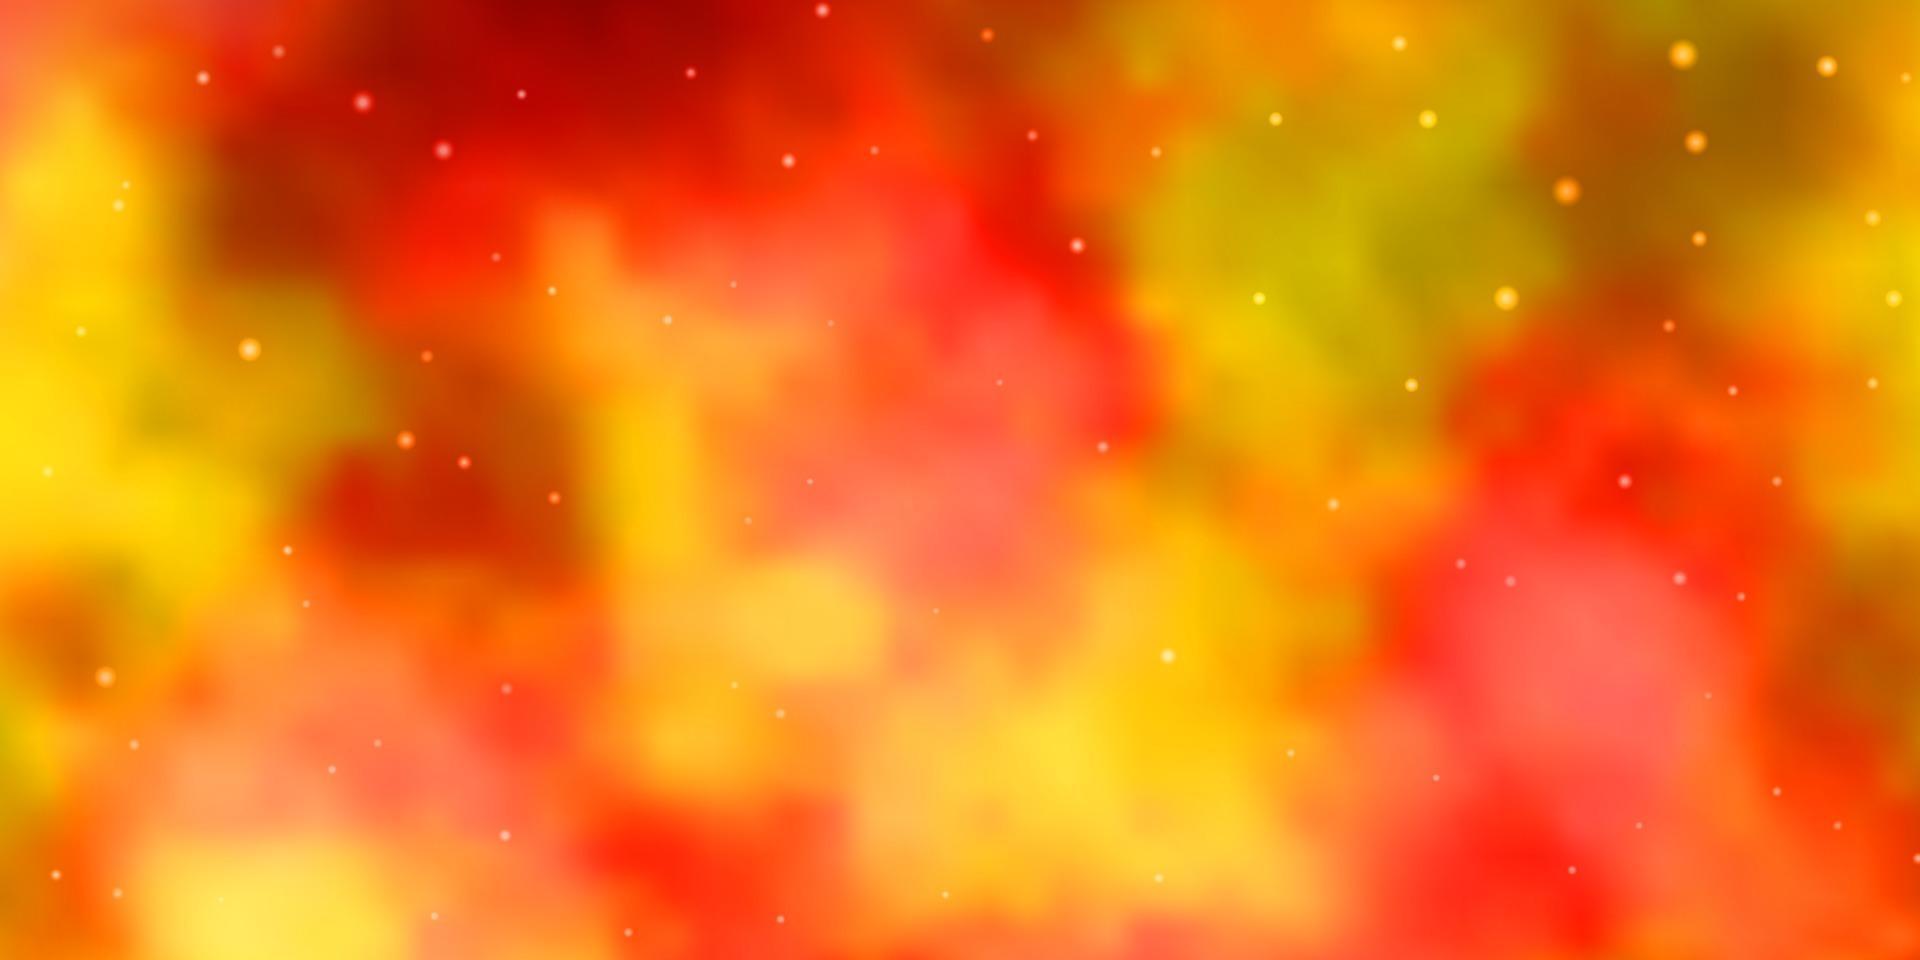 Light Orange vector background with small and big stars.